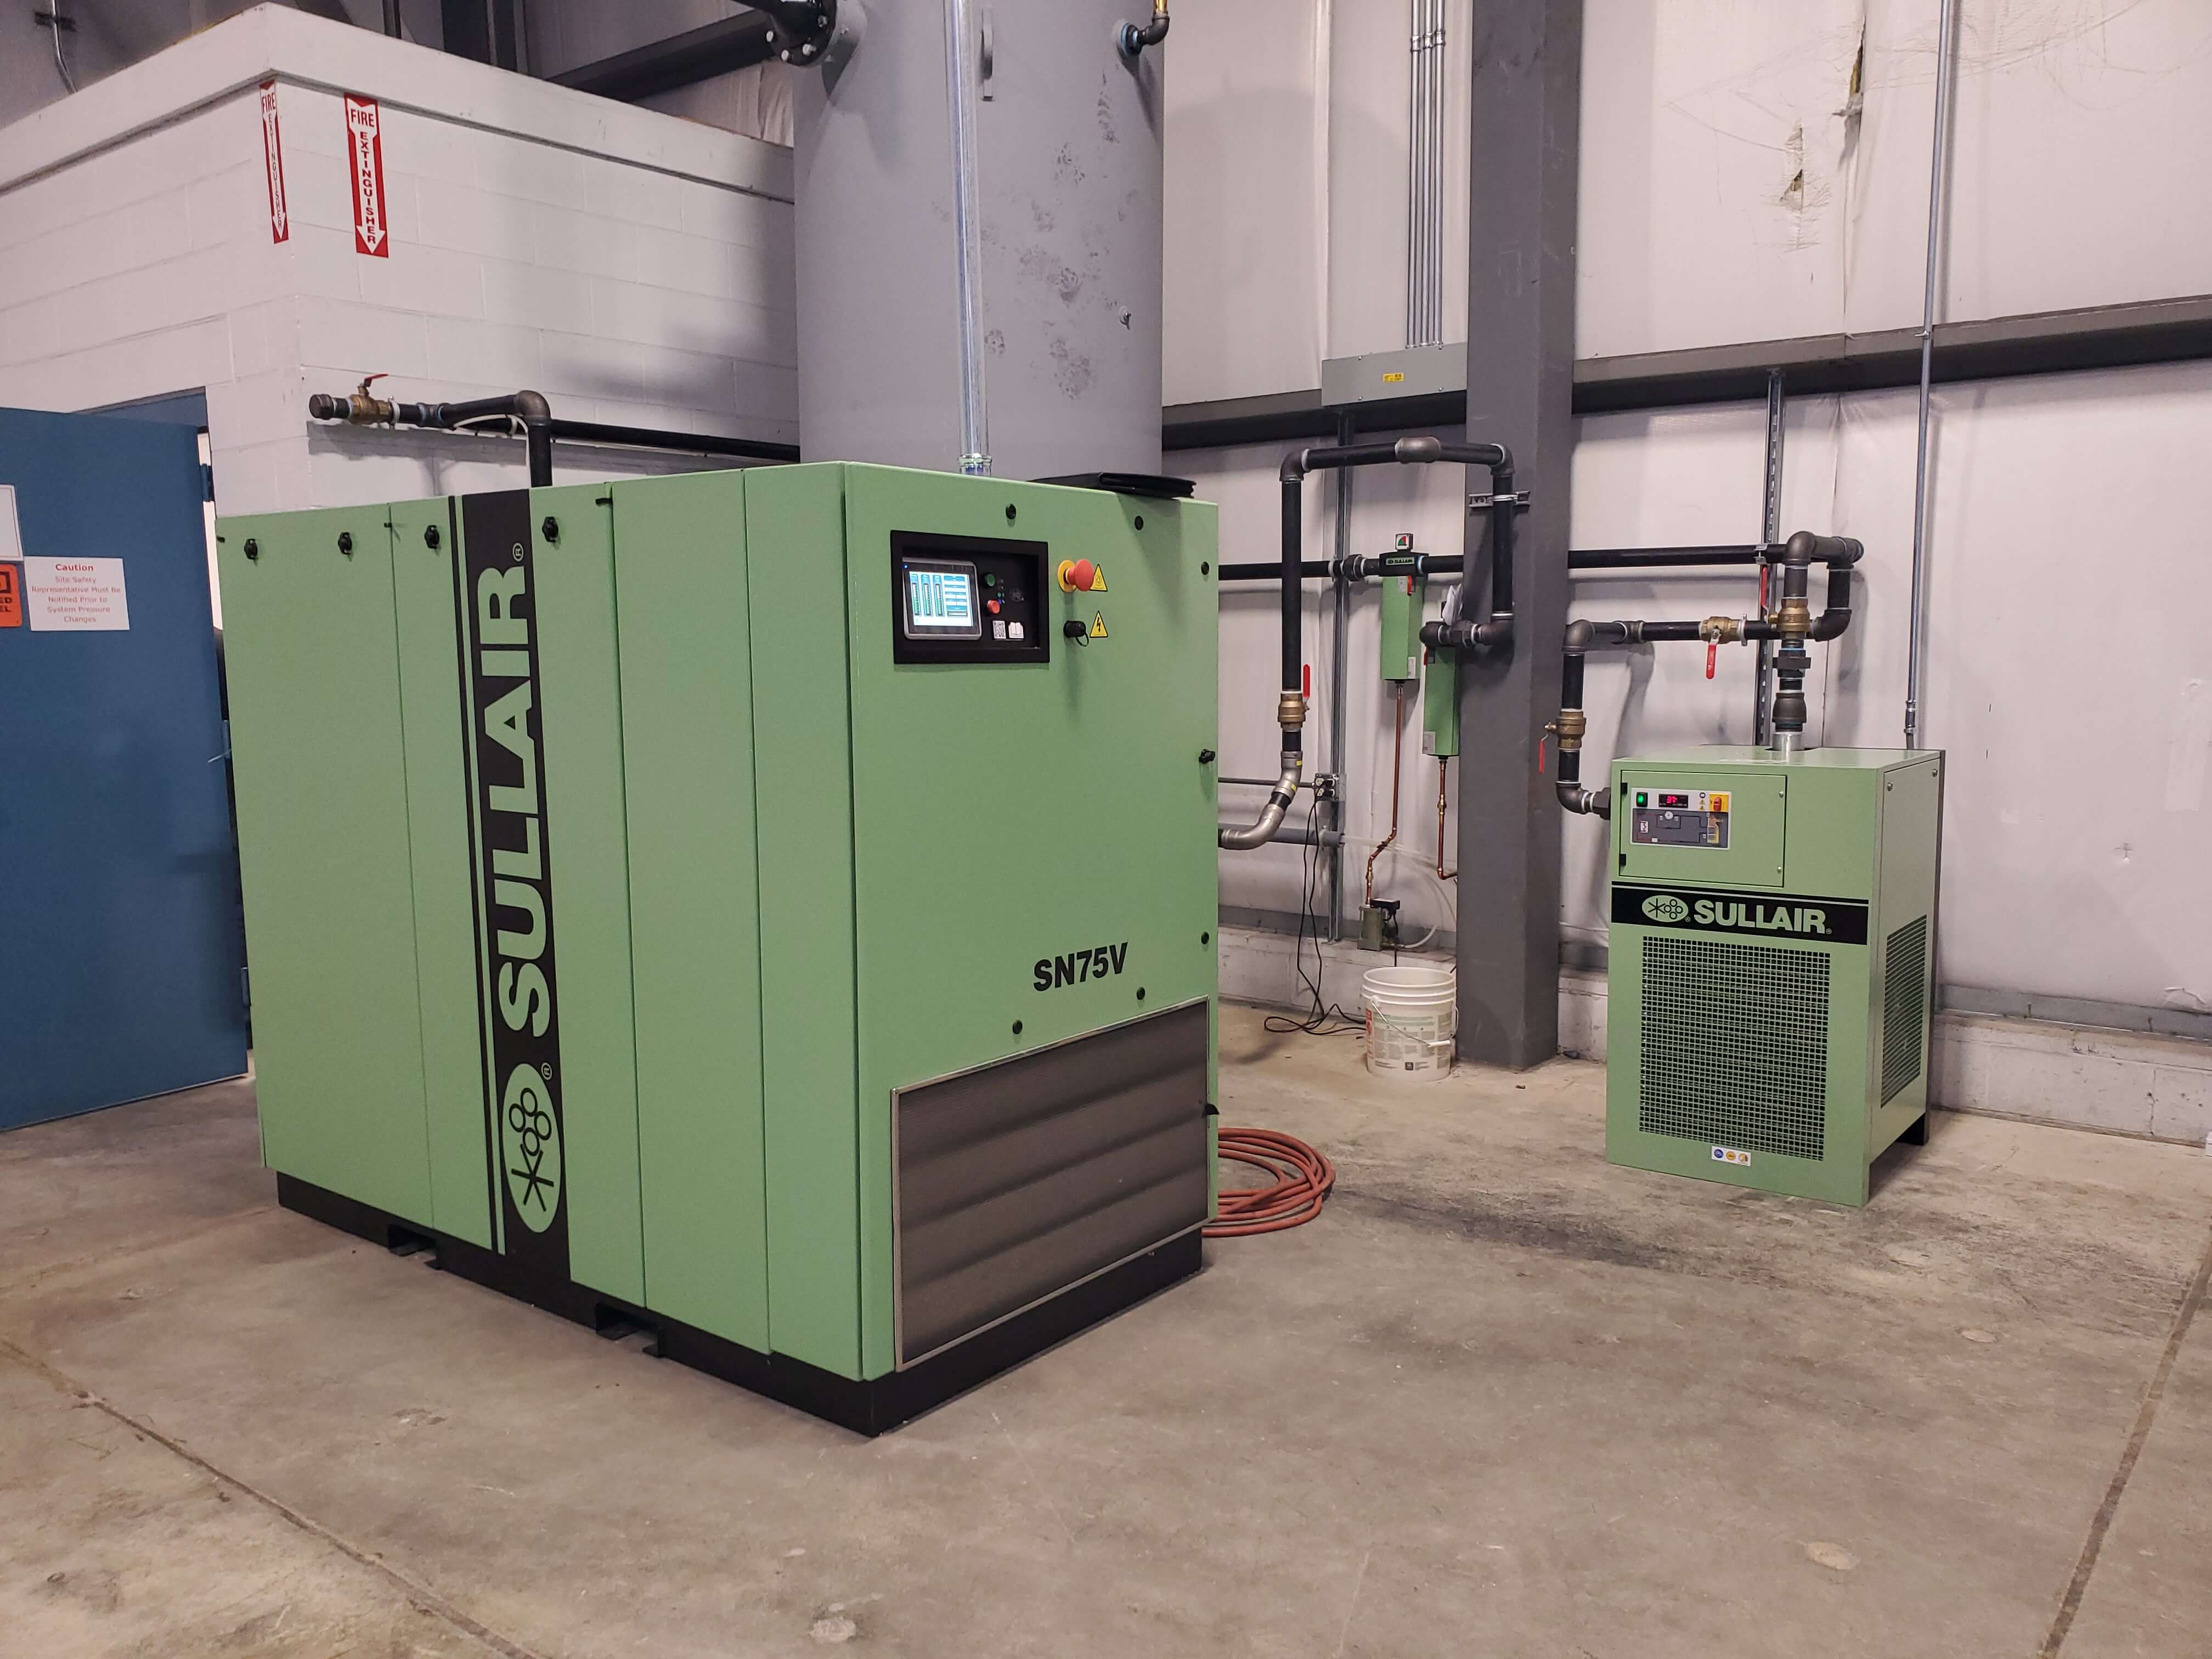 Sullair compressor and dryer for food plant packaging and process needs